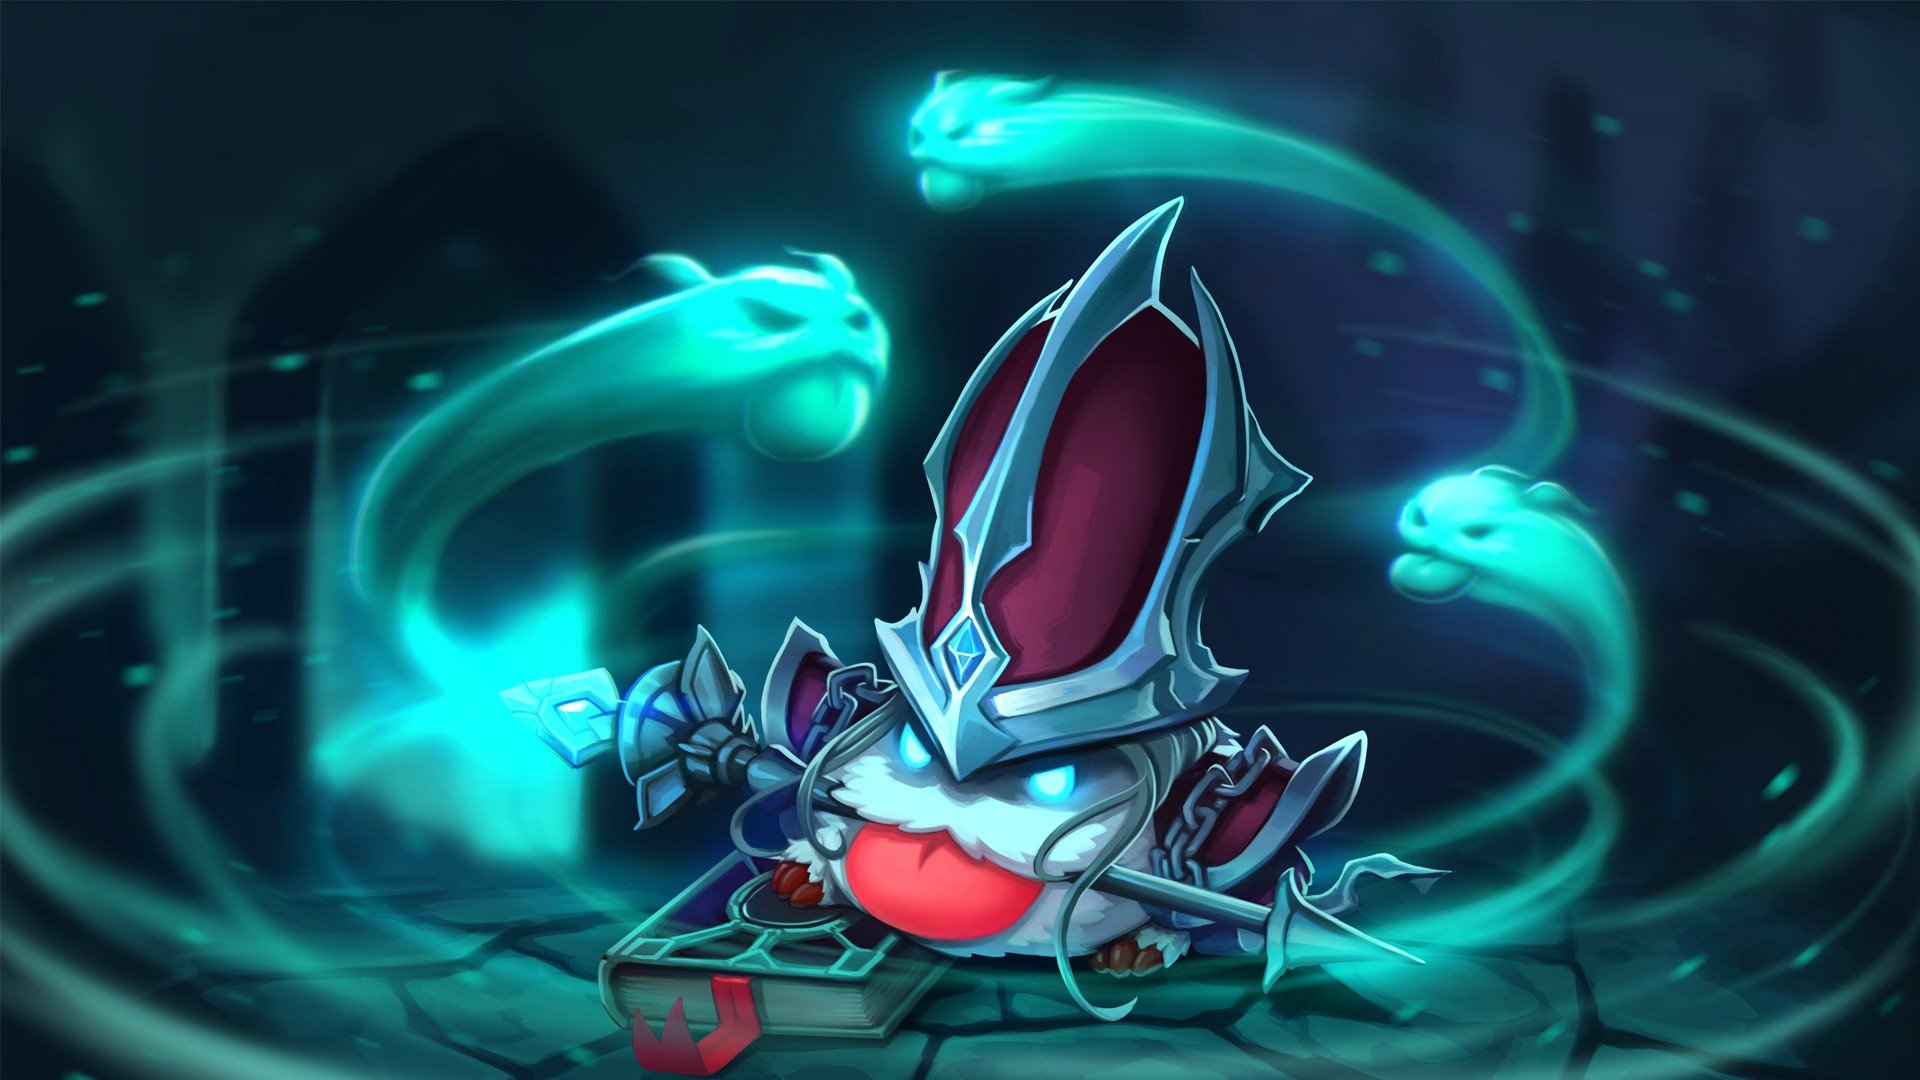 Download 1080p Poro (League Of Legends) PC wallpaper ID:171764 for free